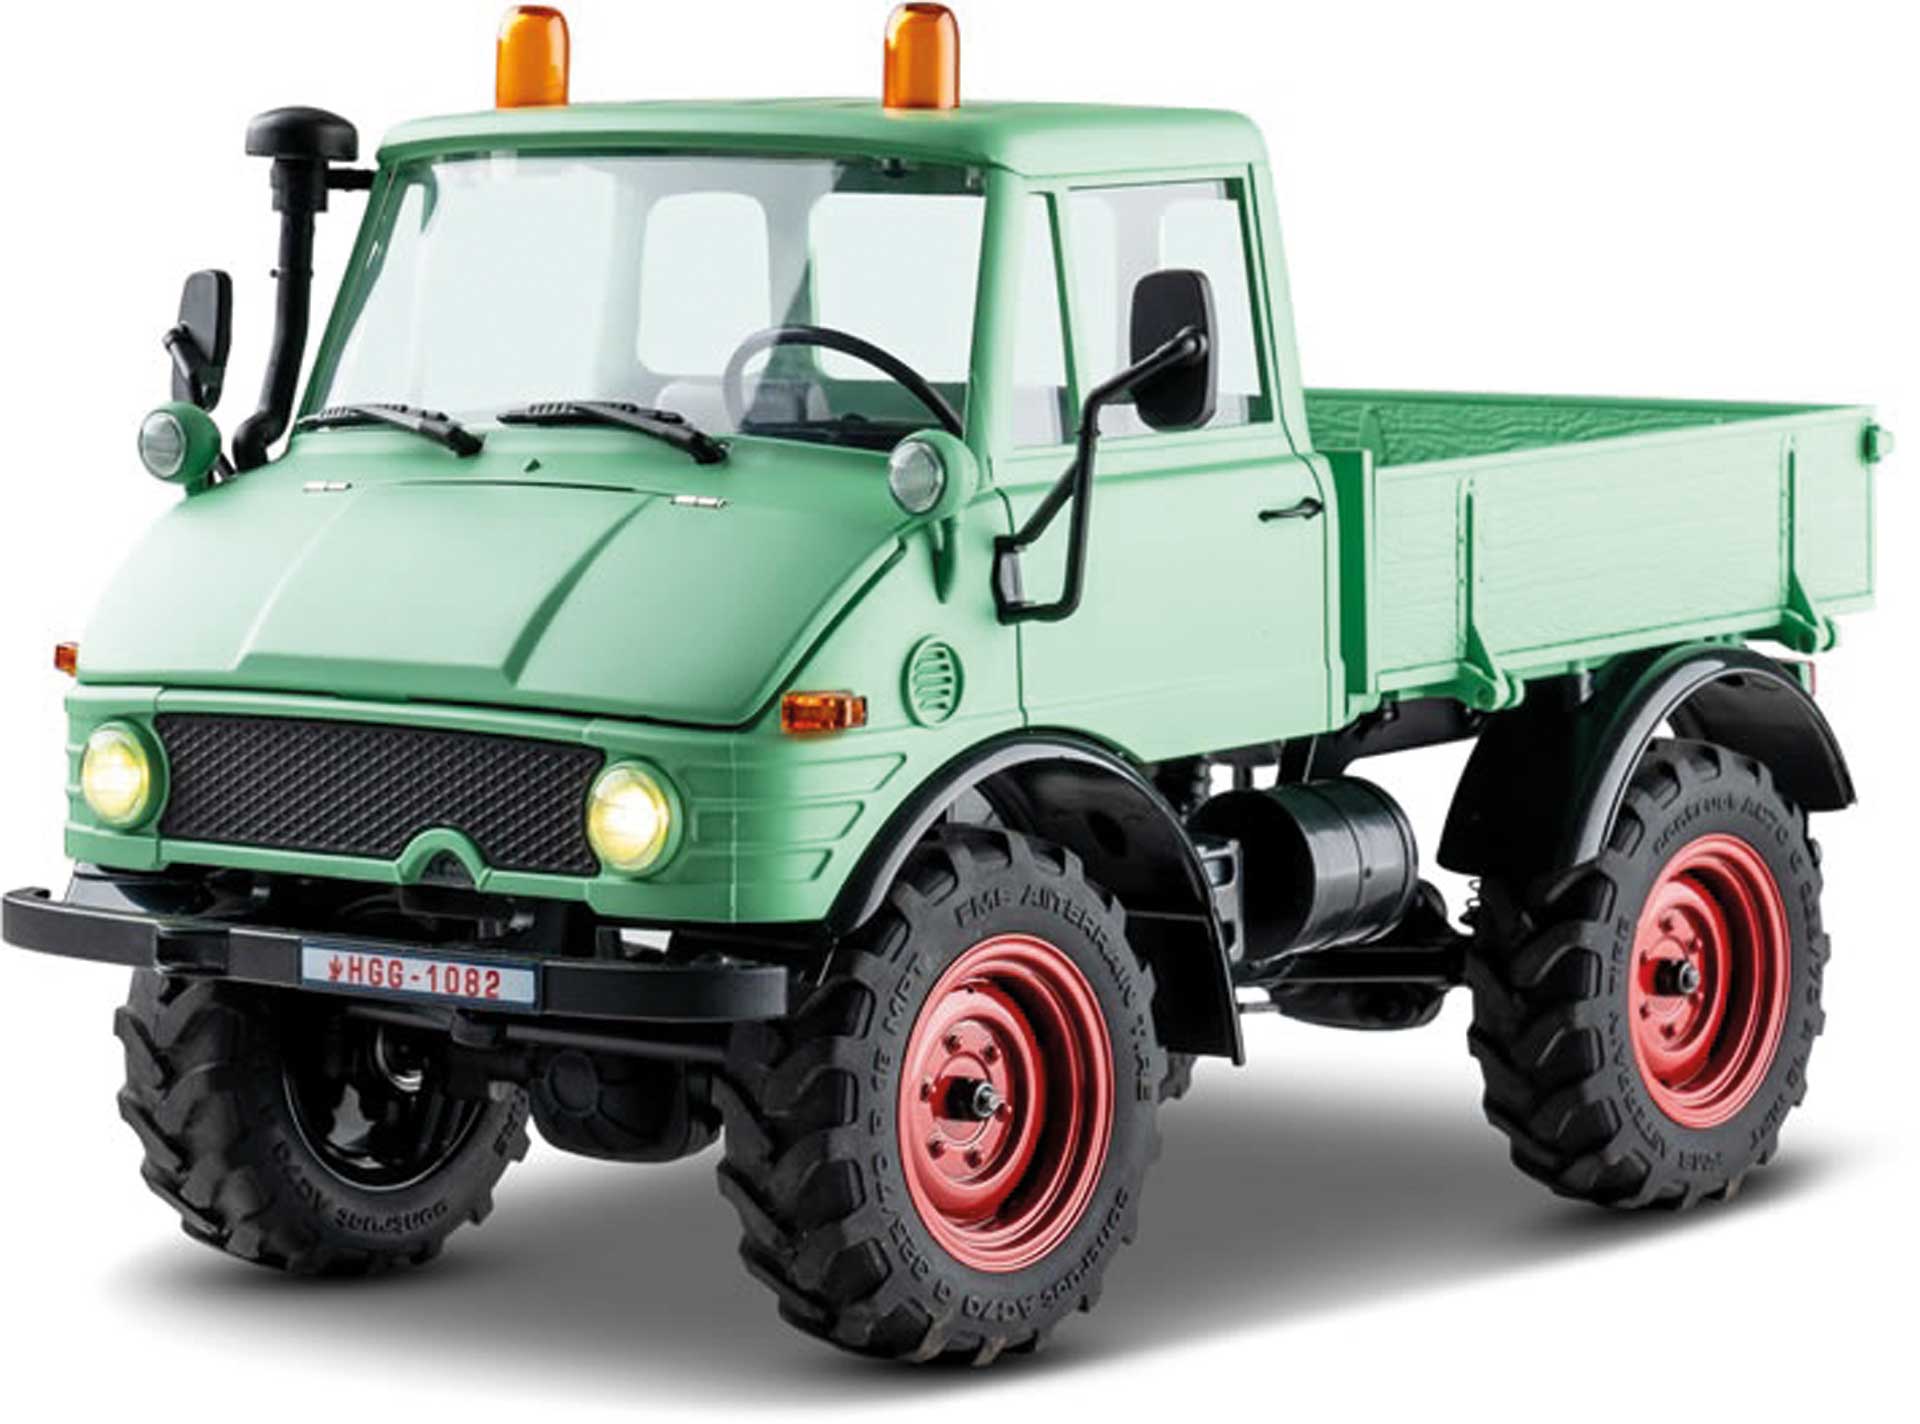 ROC HOBBY Mogrich 1:18 4WD - Crawler RTR 2.4GHz